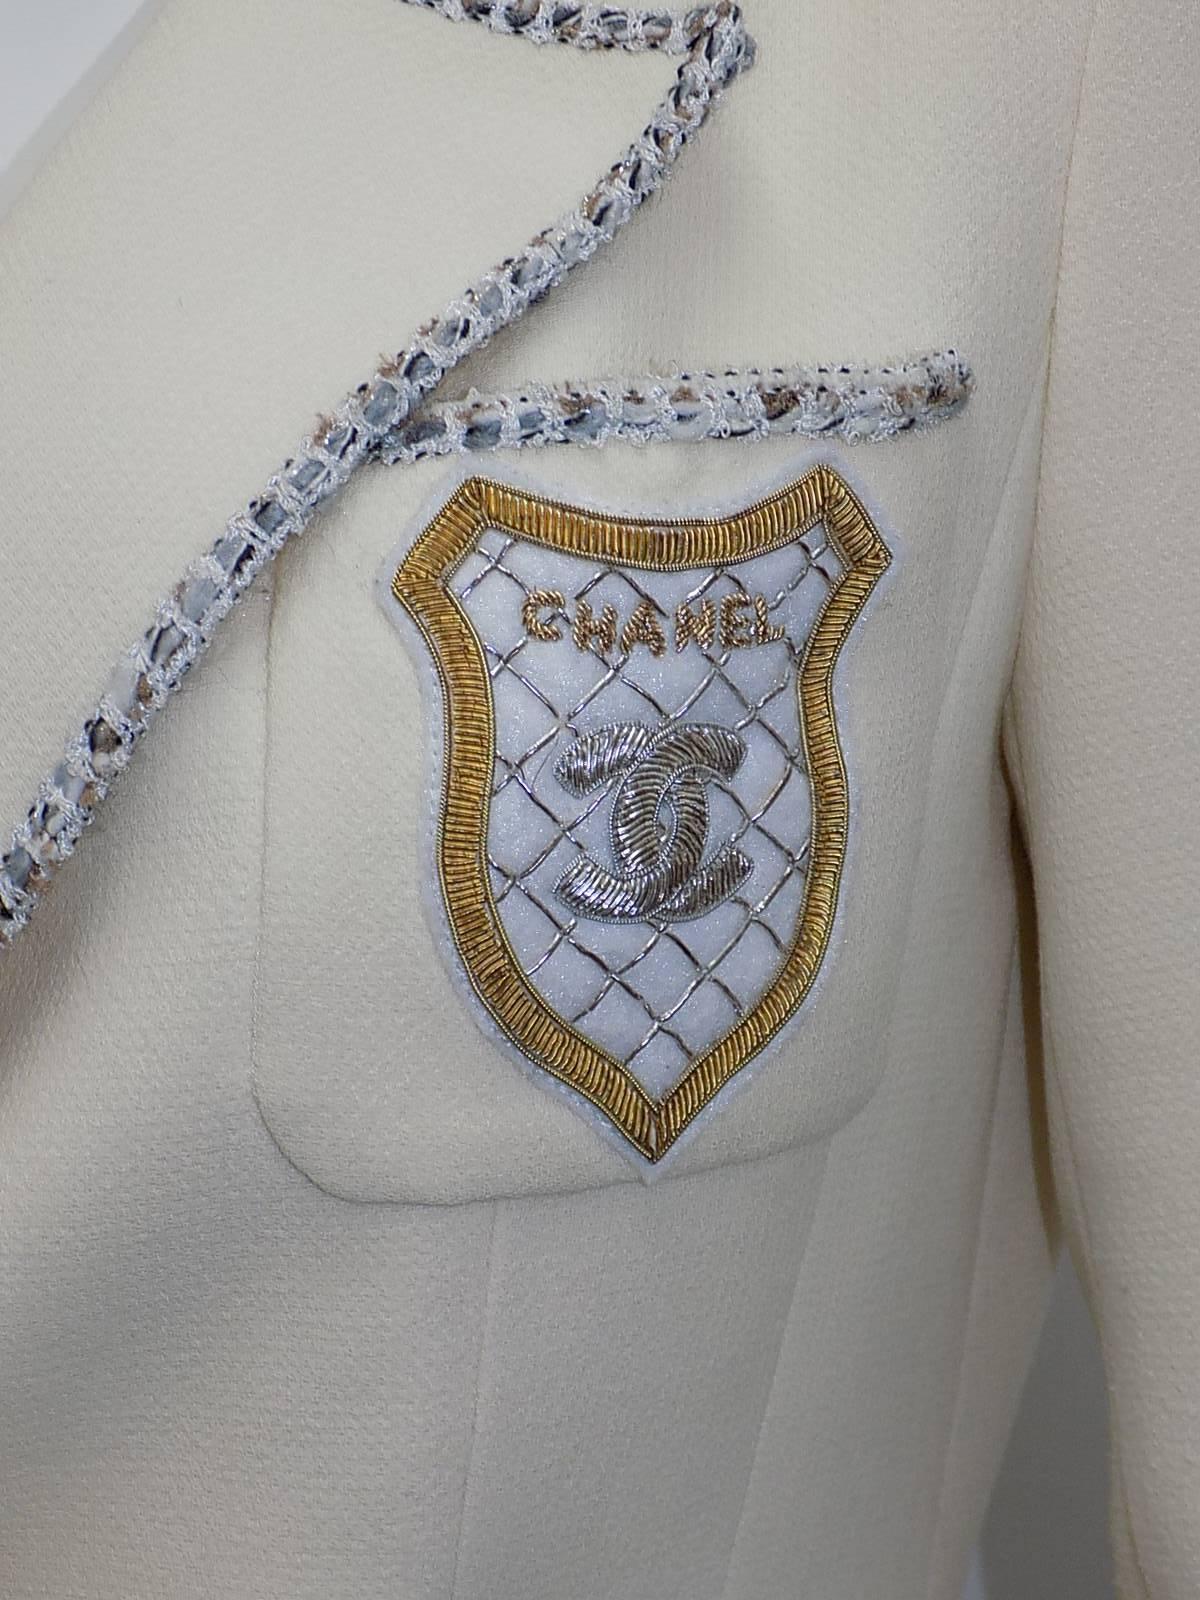  beautiful and perfect for all seasons .Chanel cropped jacket in ivory wool .gabardine  .Thin trim  with a dash of silver and gold thread to compliment silver and gold   CC logo pocket patch . YOU CAN WEAR SILVER OR GOLD JEWELRY WITH  THE JACKET two